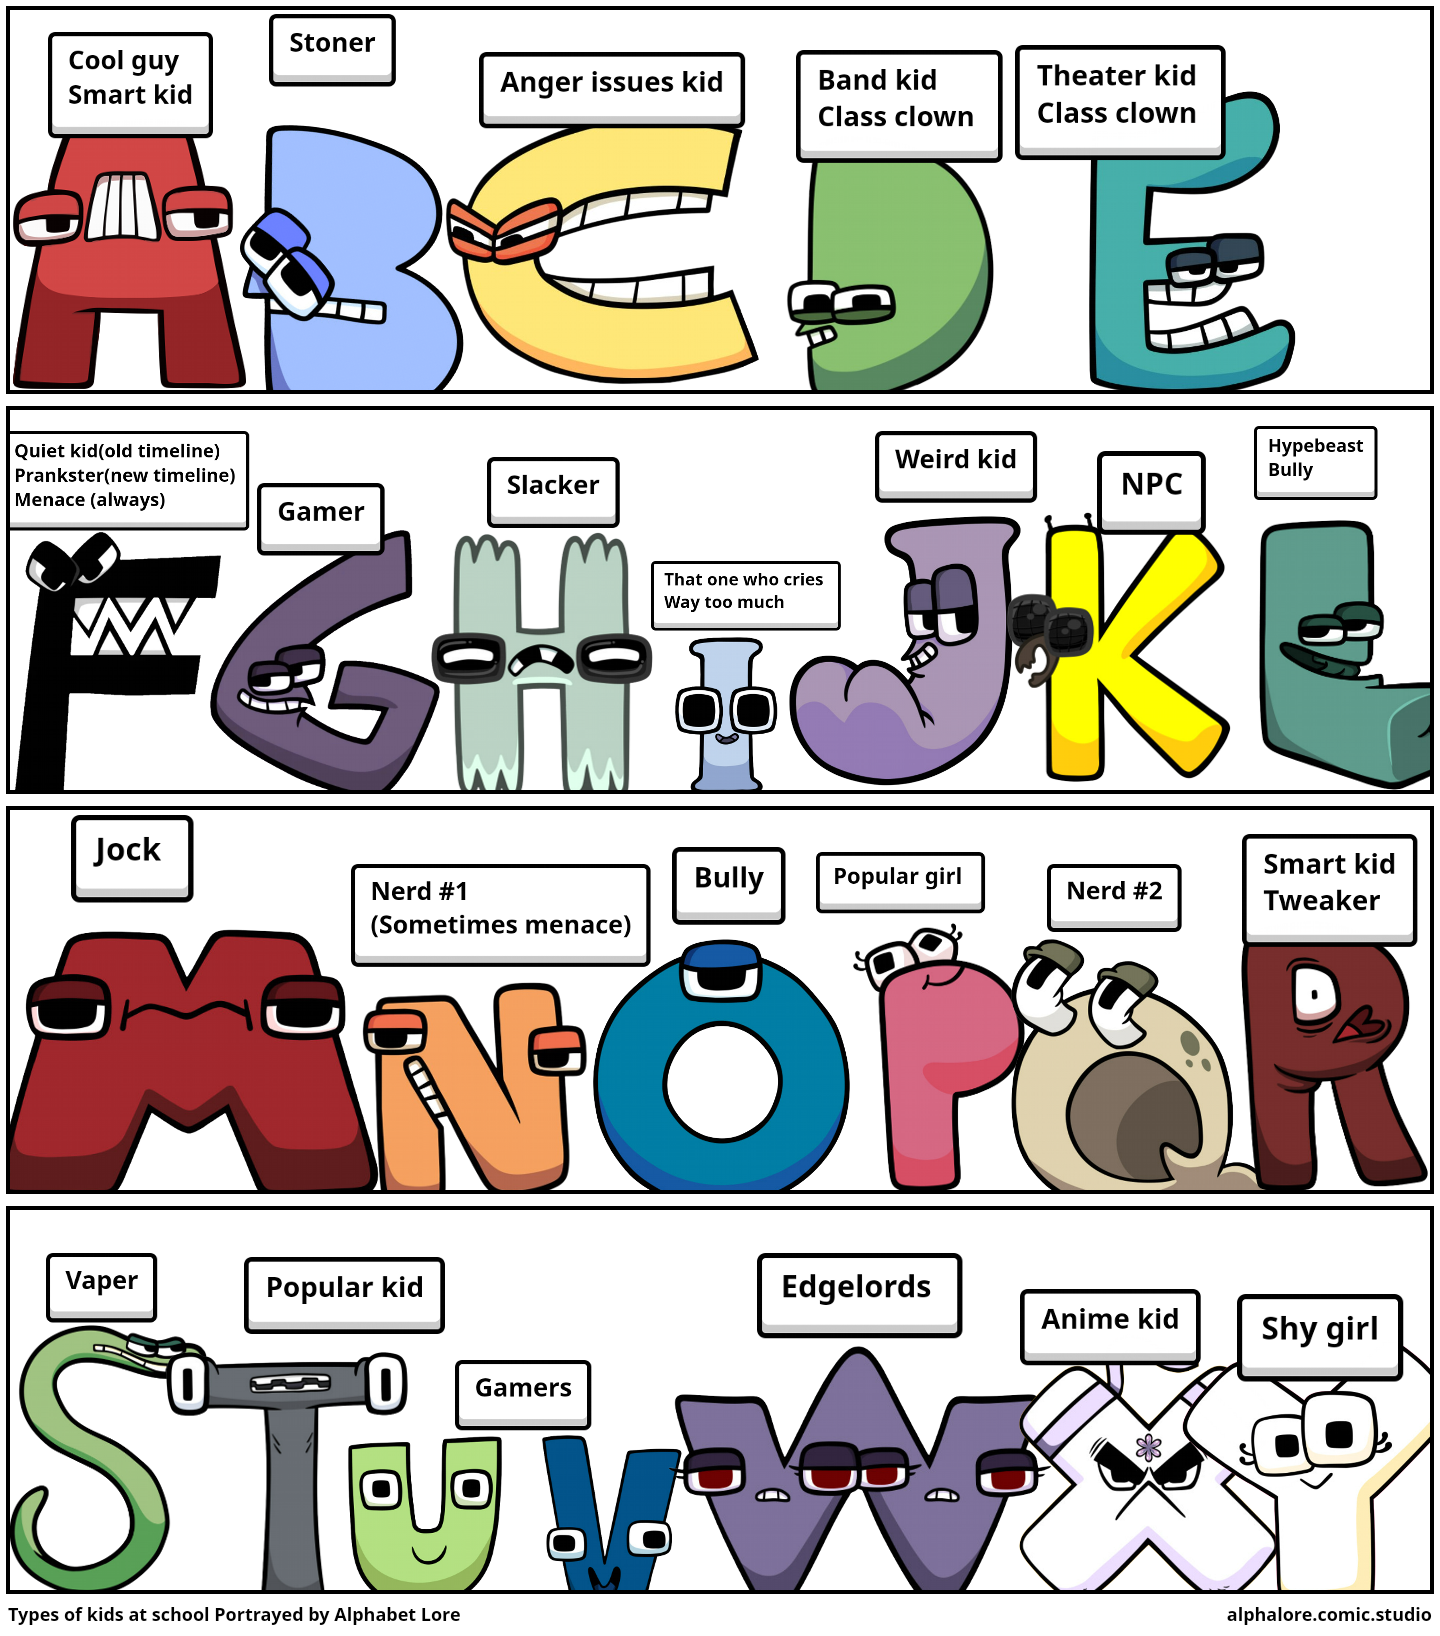 Types of kids at school Portrayed by Alphabet Lore